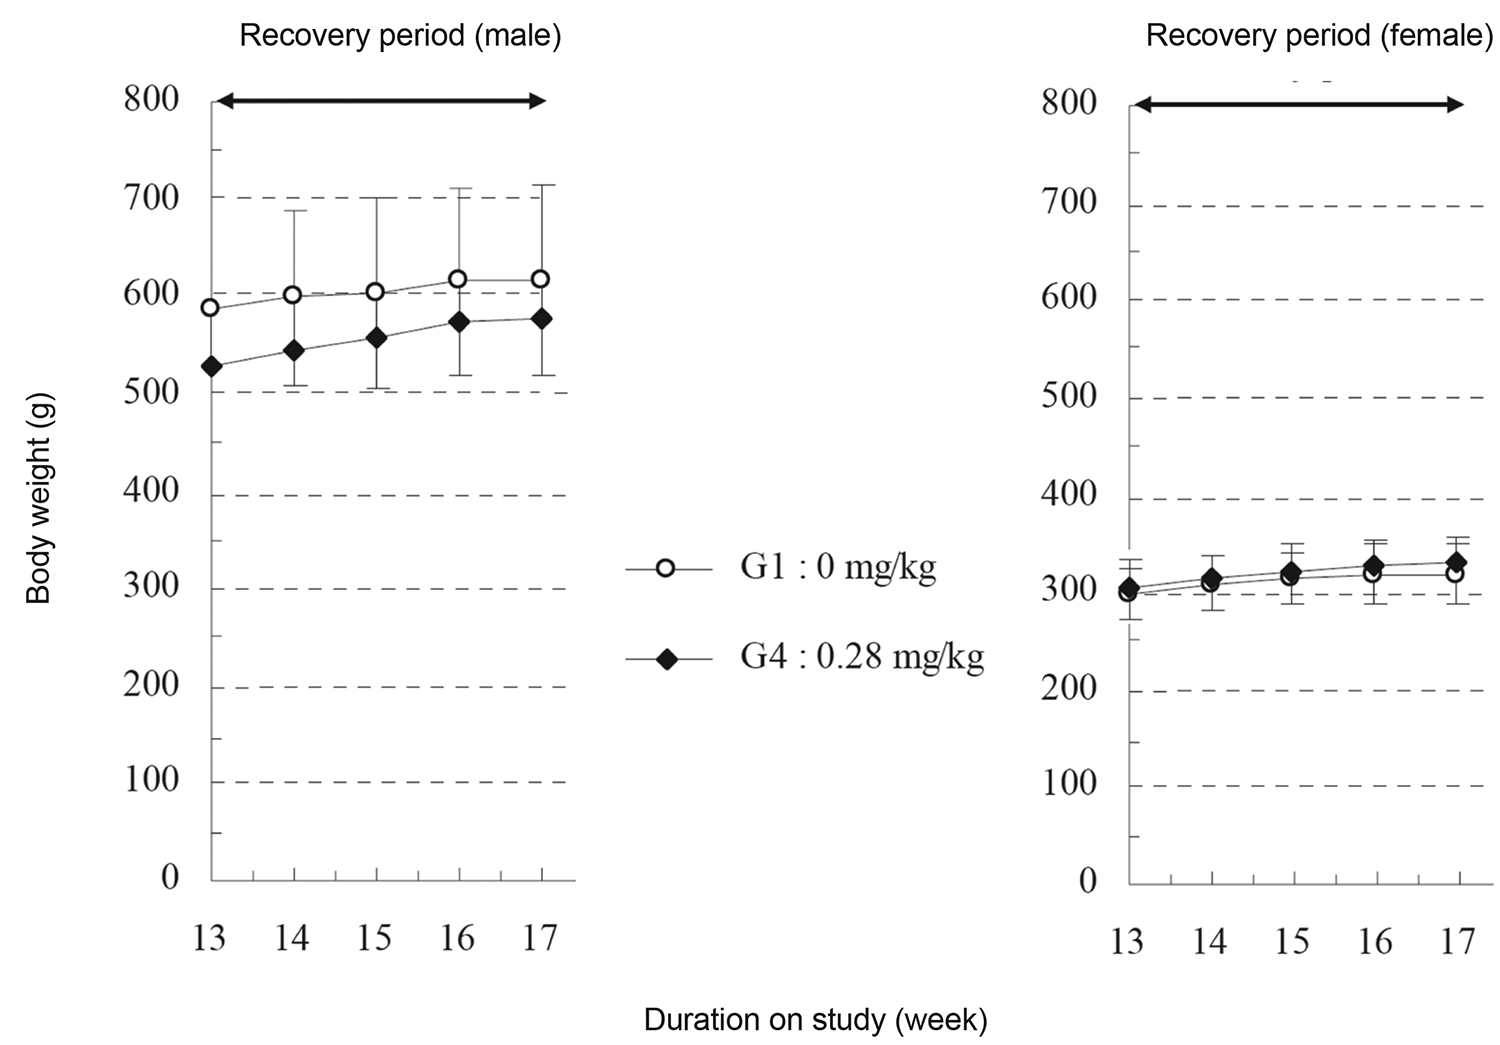 The high-dosage group showed no significant changes in body weight compared to the control group during the 4-week recovery period. The high-dosage group showed no significant change in body weight compared to the control group during the 4-week recovery period.